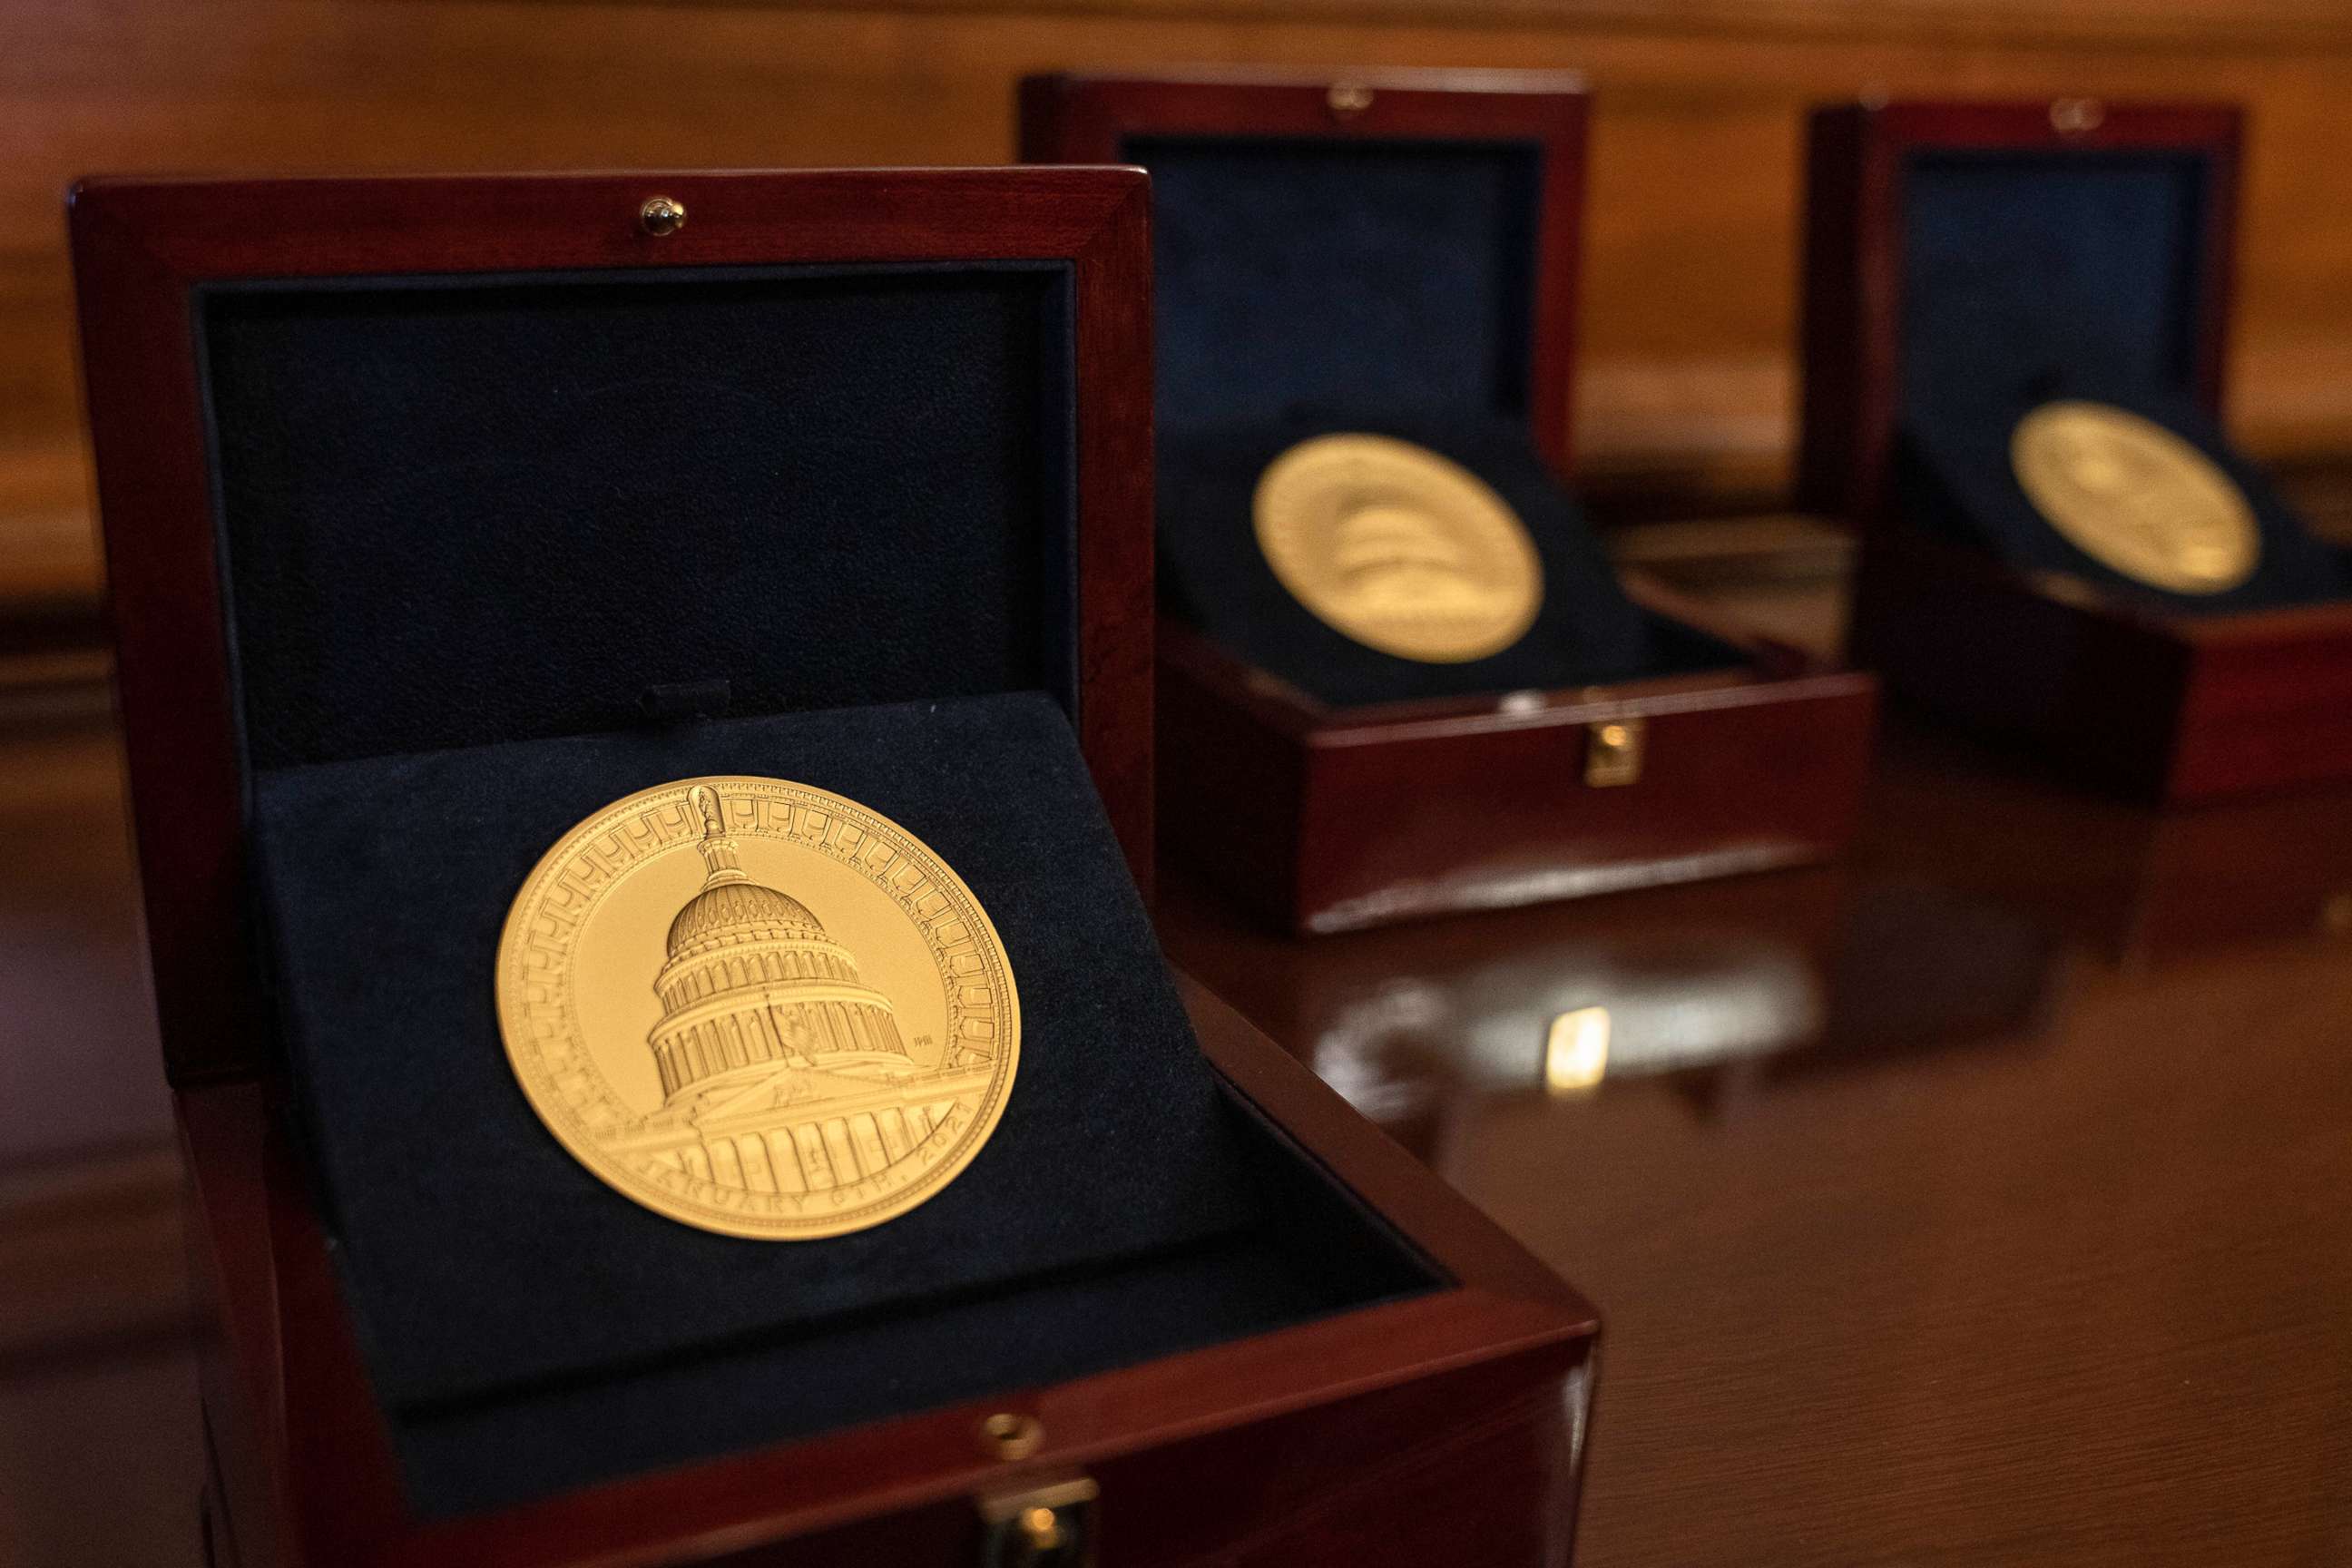 PHOTO: Congressional Gold Medals, in honor of the U.S. Capitol Police, the Washington, DC Metropolitan Police, and others who protected the Capitol on Jan. 6, 2021, are displayed ahead of a ceremony at the Capitol, Dec. 6, 2022, in Washington.